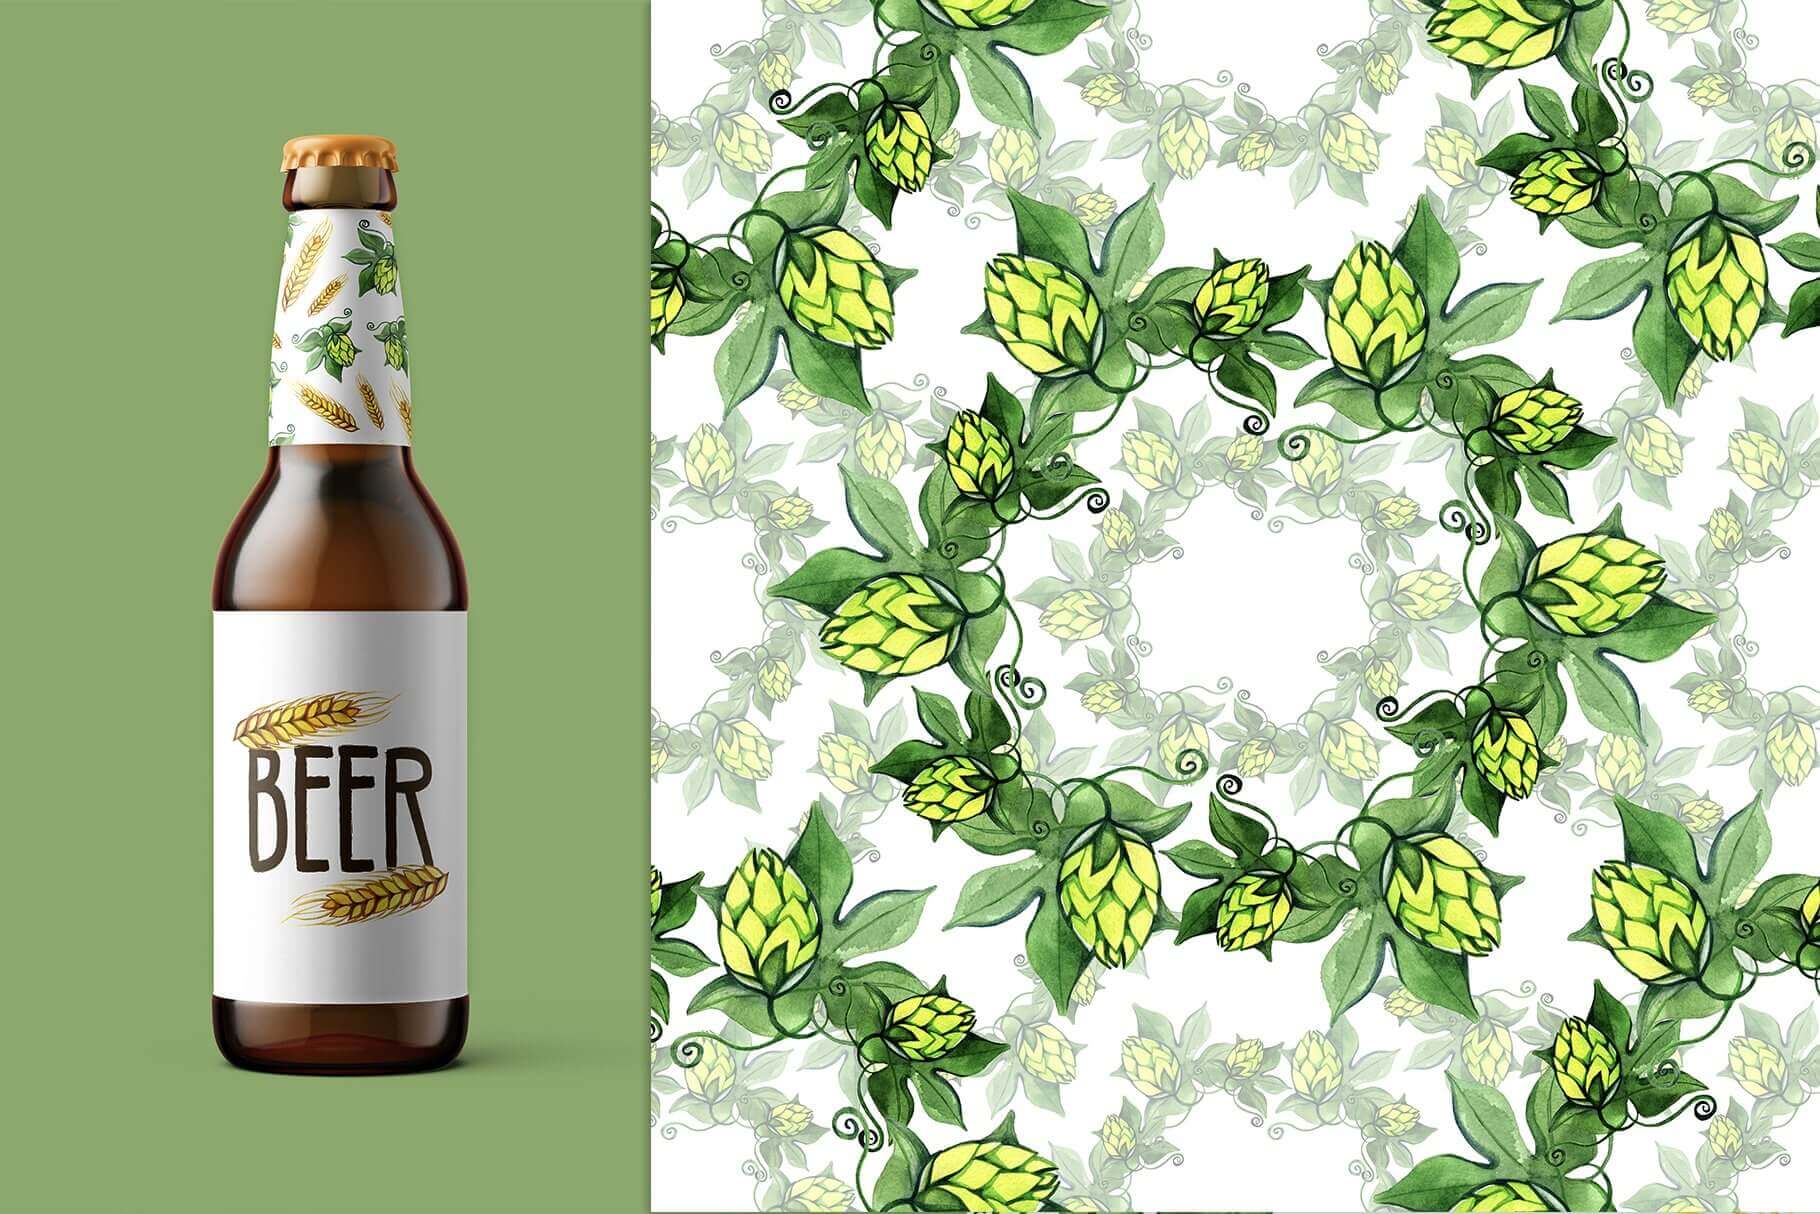 Two parallel images, one of beer and the other of hops.